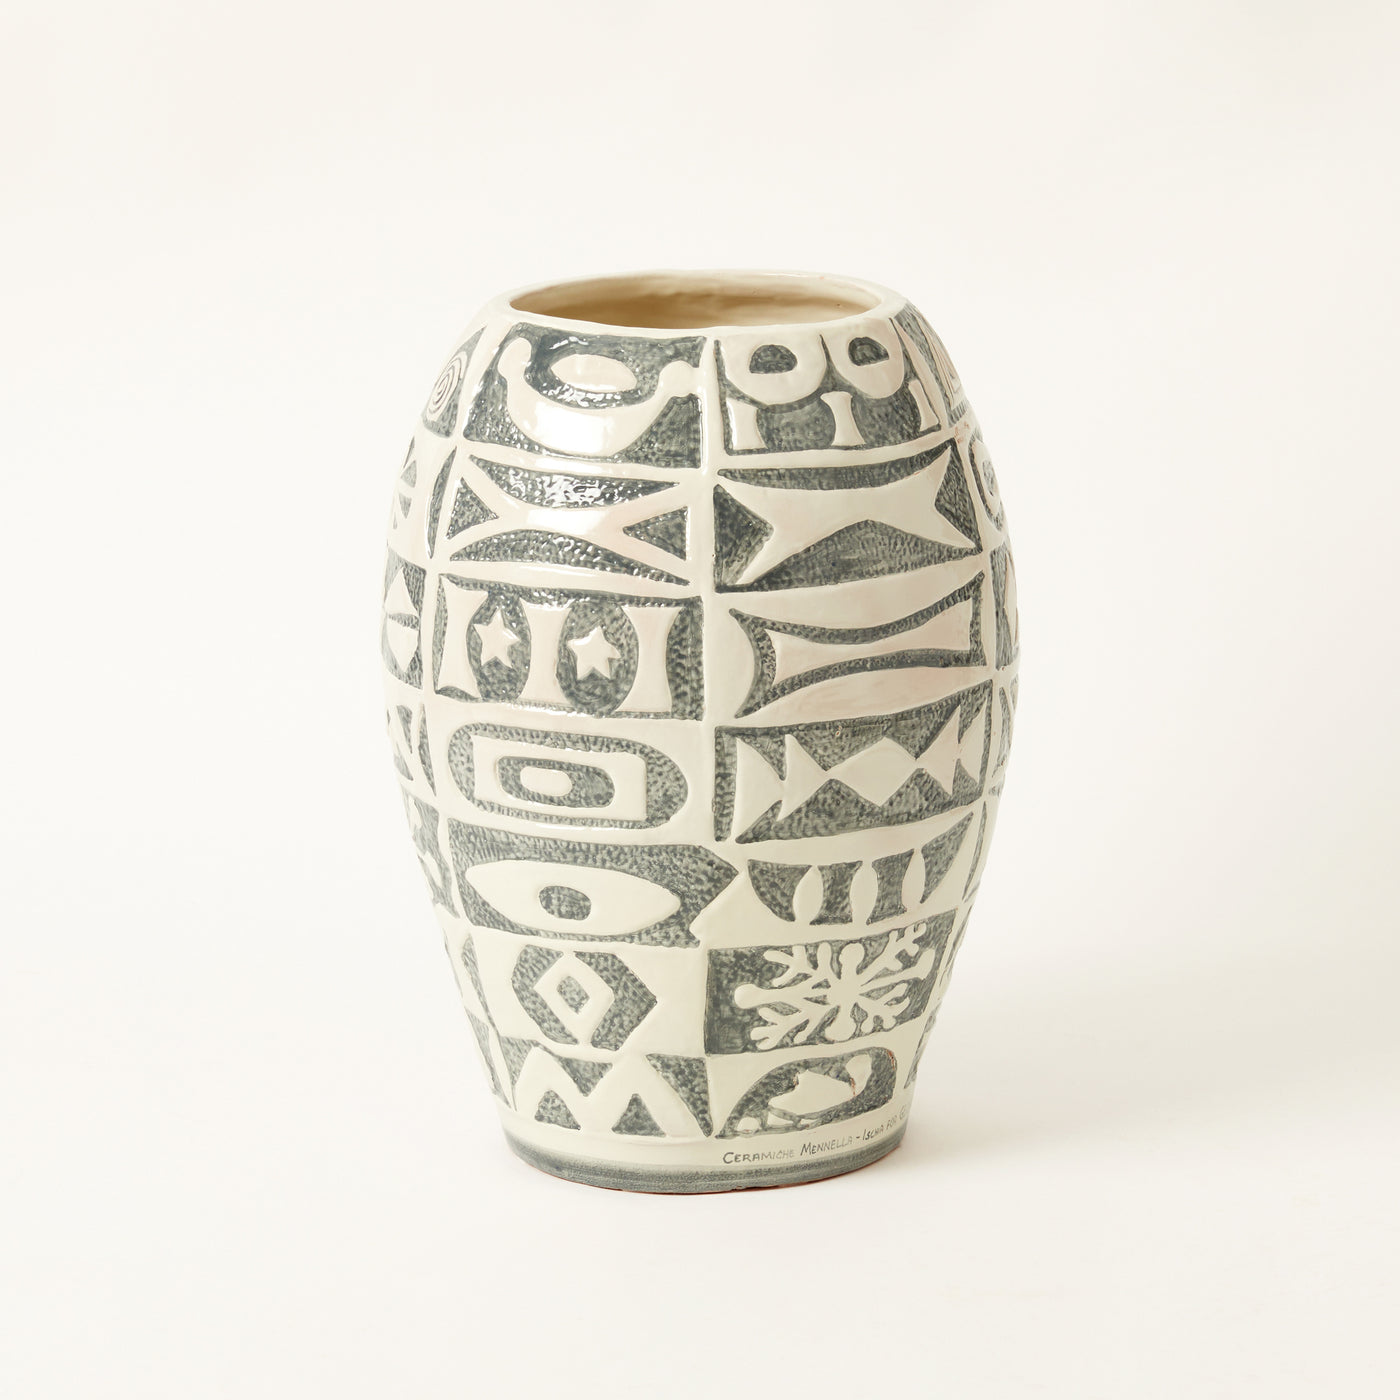 Italian Ceramic Jar with Mid-Century Design, Made Exclusively for GEORGE